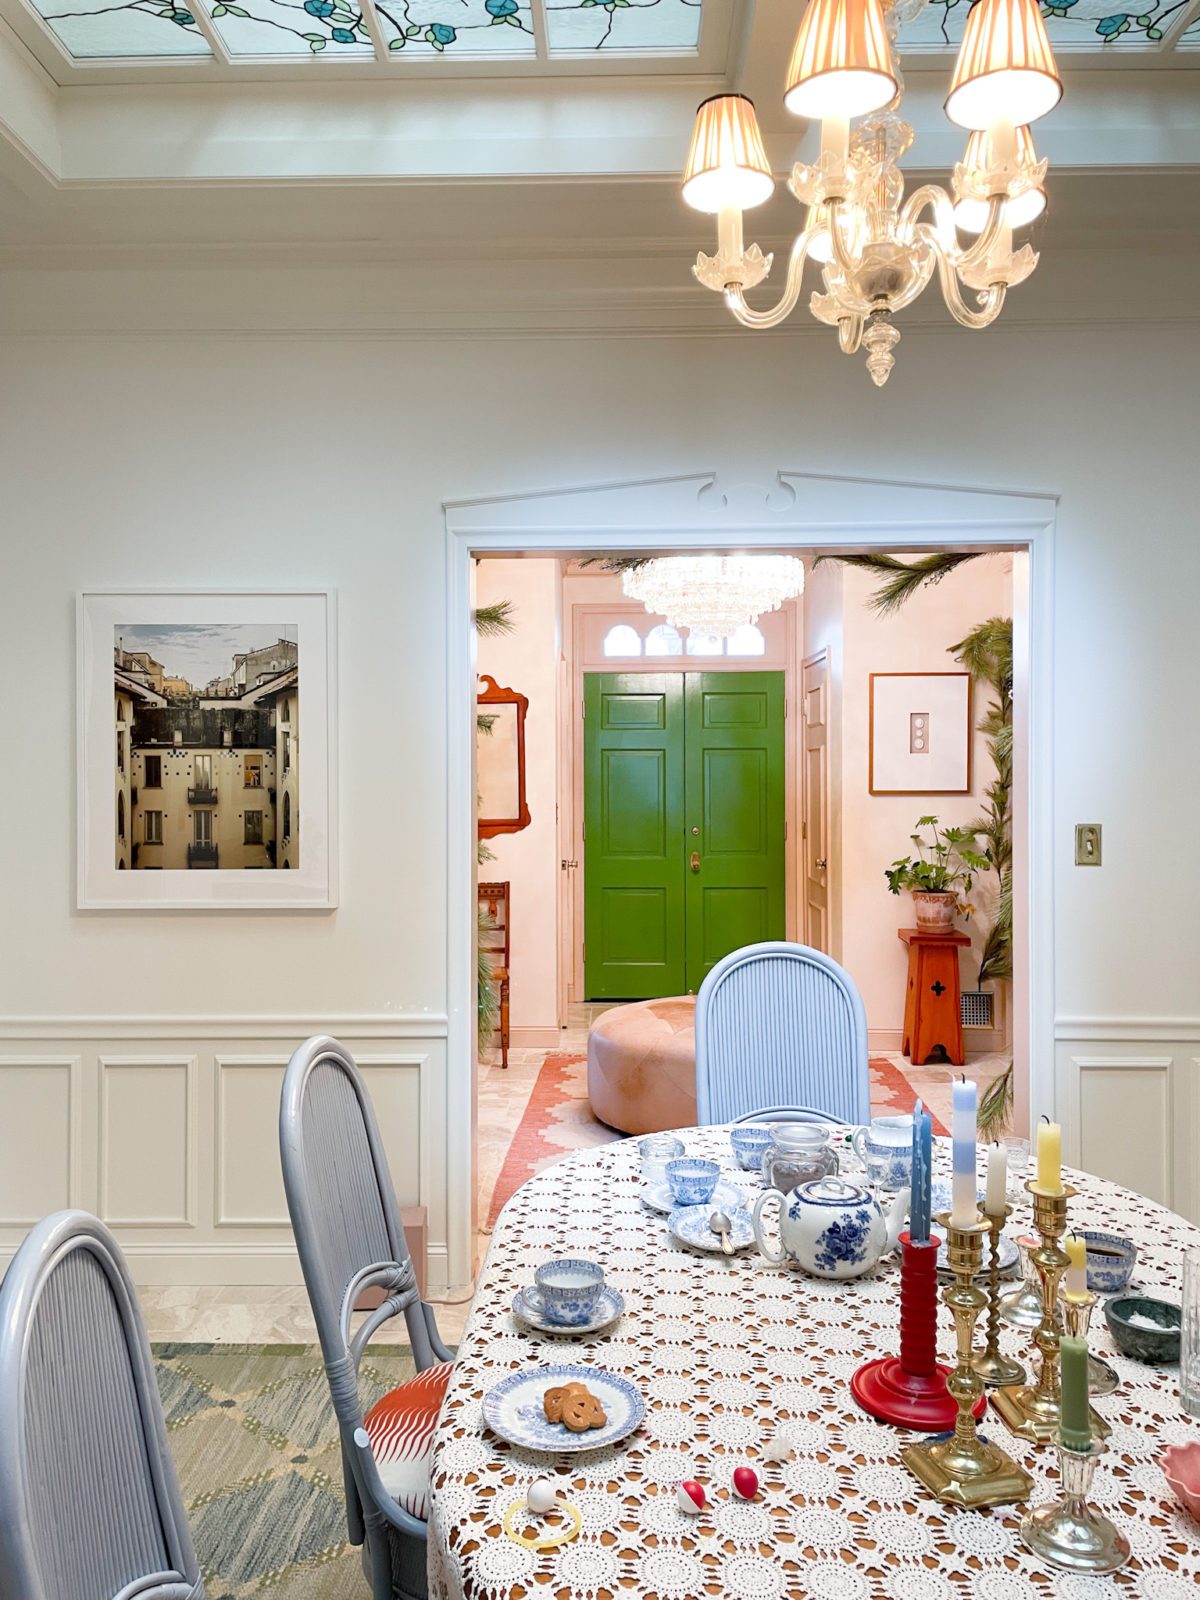 Dining room with blue secondhand chairs, Chairish rug, white walls, a large skylight, and a green front door in the distance.